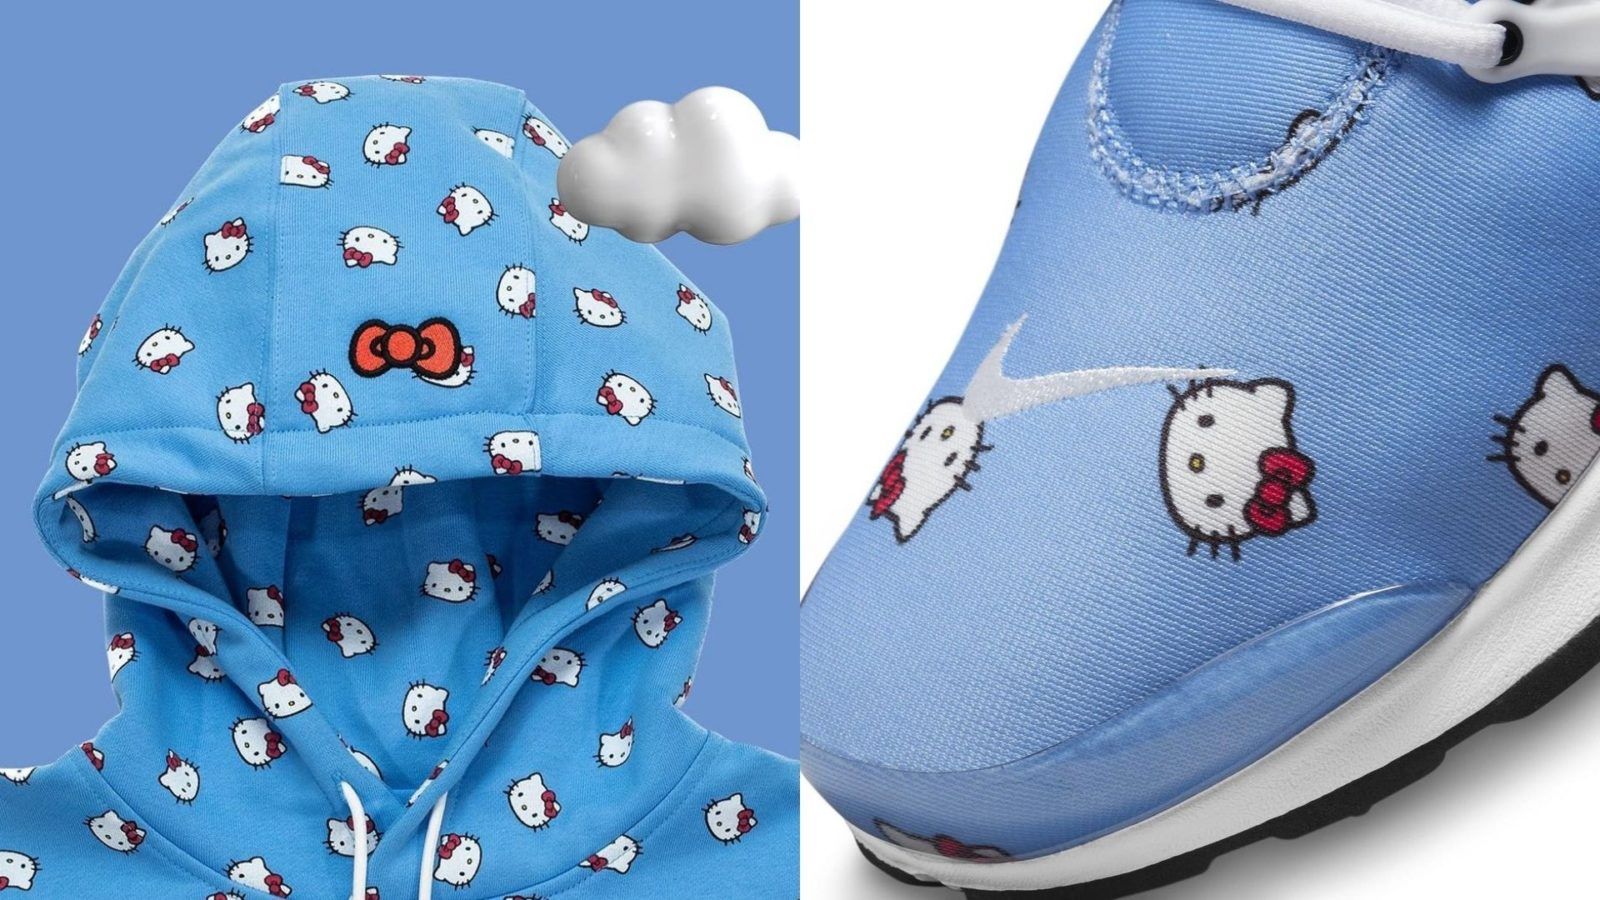 atmos reveals Nike x Hello Kitty collection lookbook